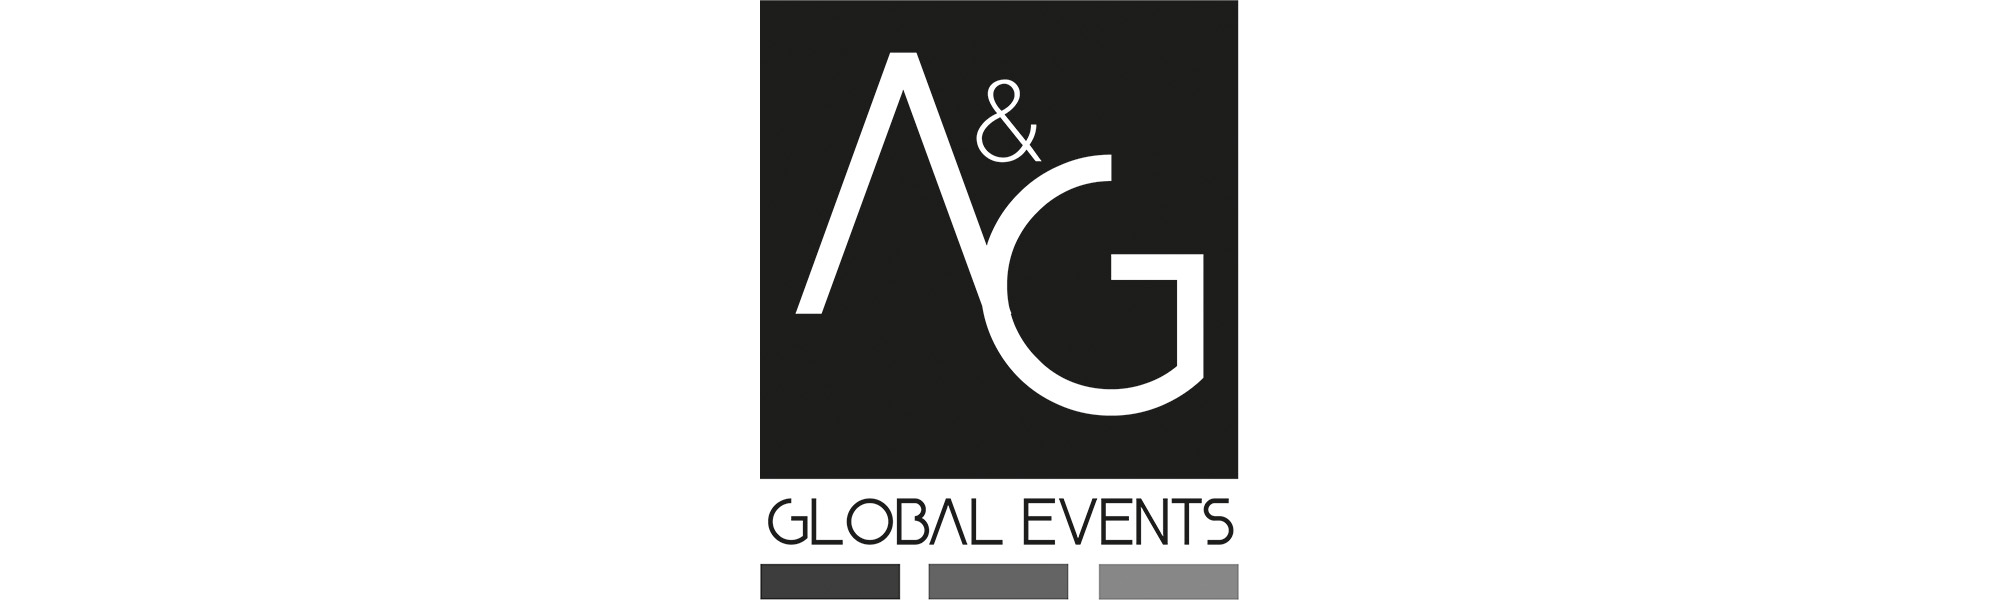 A&G-Global-events